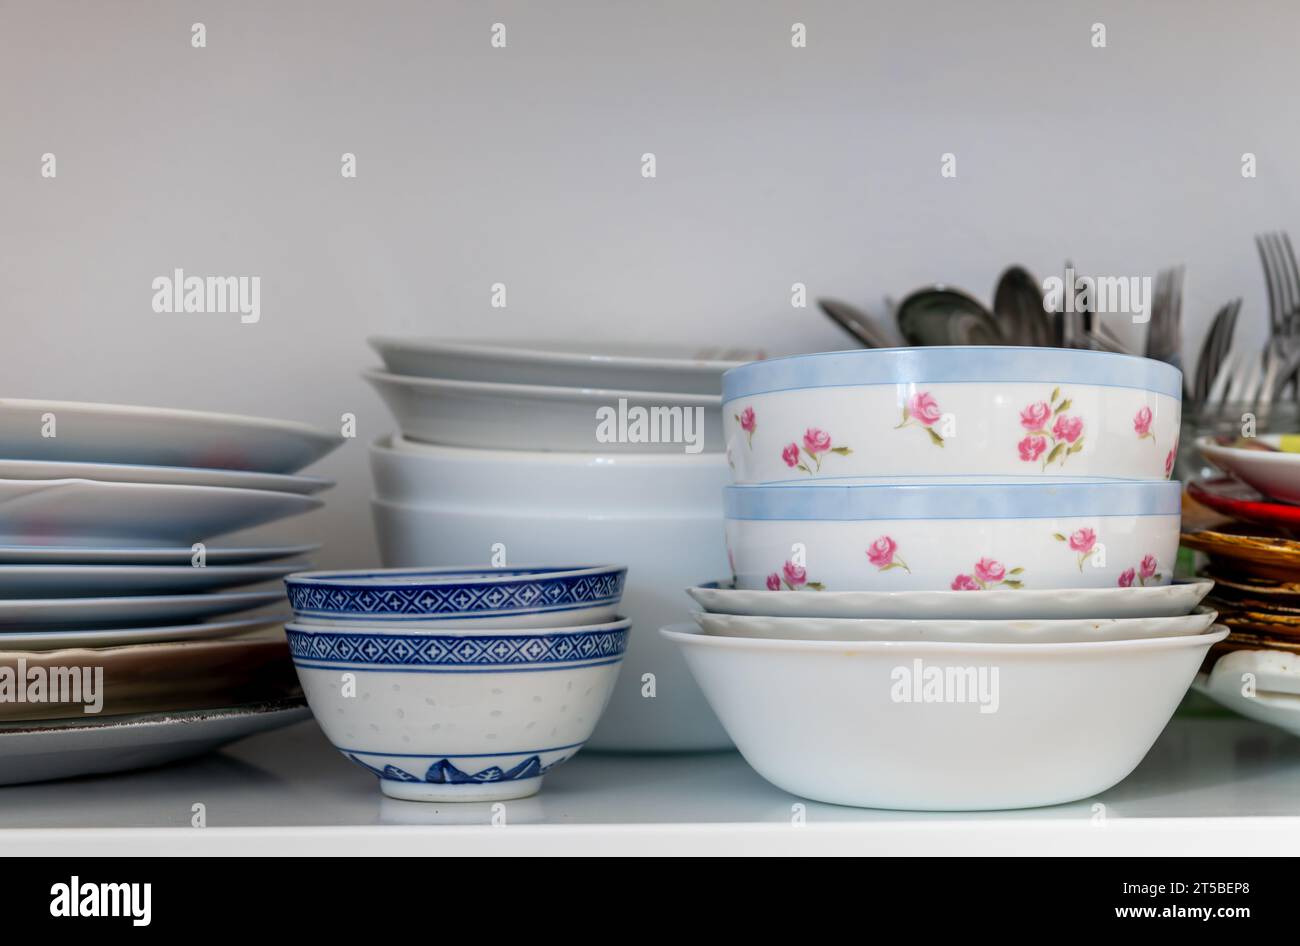 Tableware and dinnerware on a kitchen shelf. Stock Photo